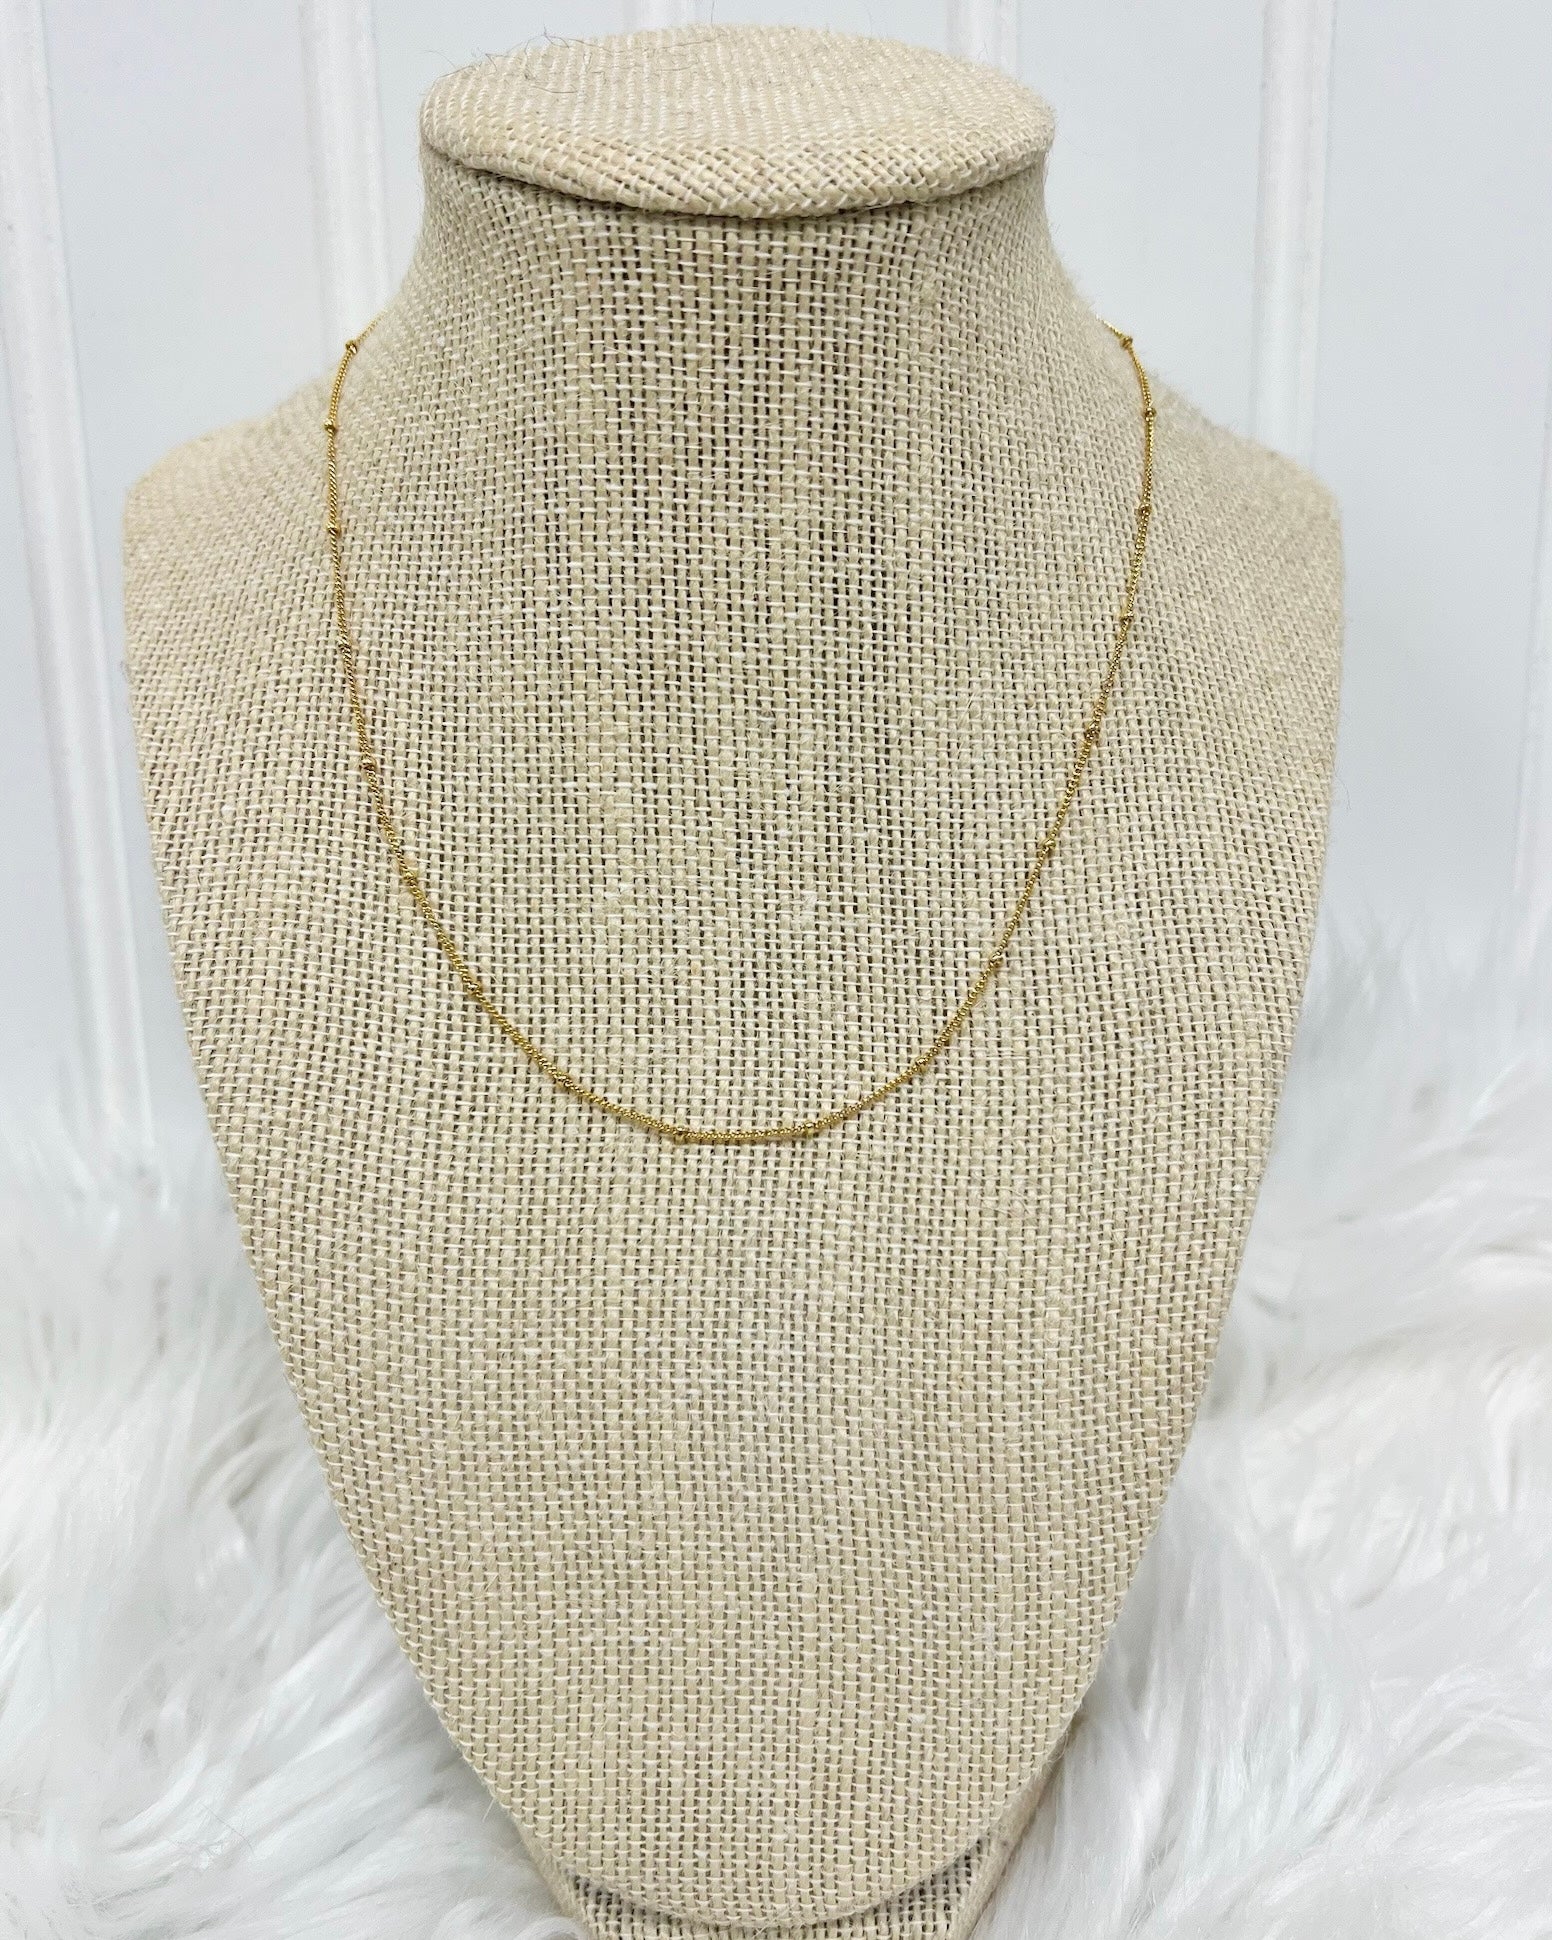 Satellite Chain Layering Necklace in Gold FINAL SALE